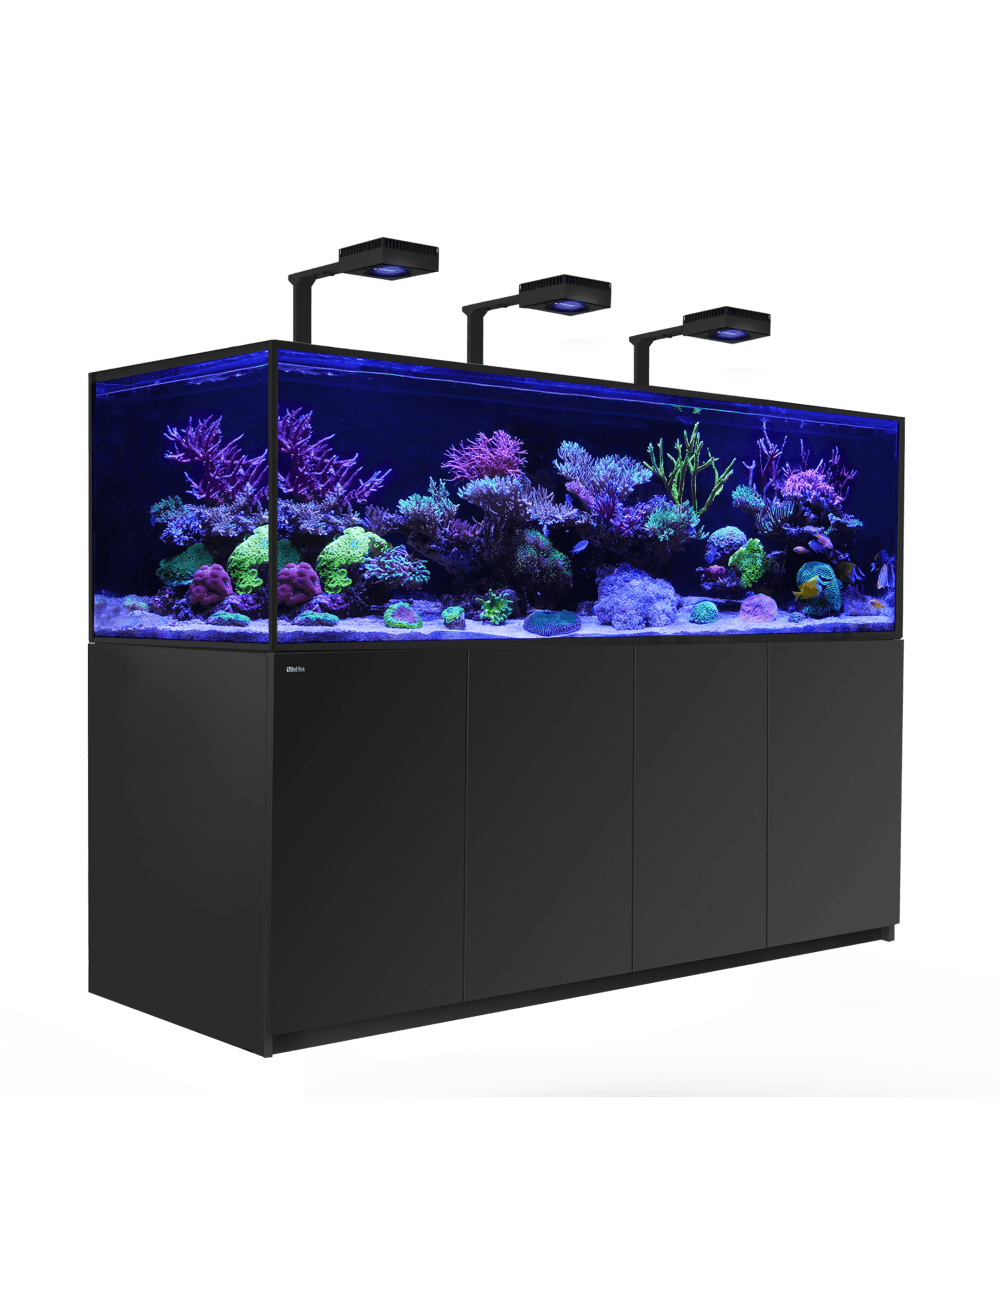 red-sea-reefer-deluxe-s-1000-noir-1000-l-grands-systemes-recifaux-premium-avec-reefled-160s